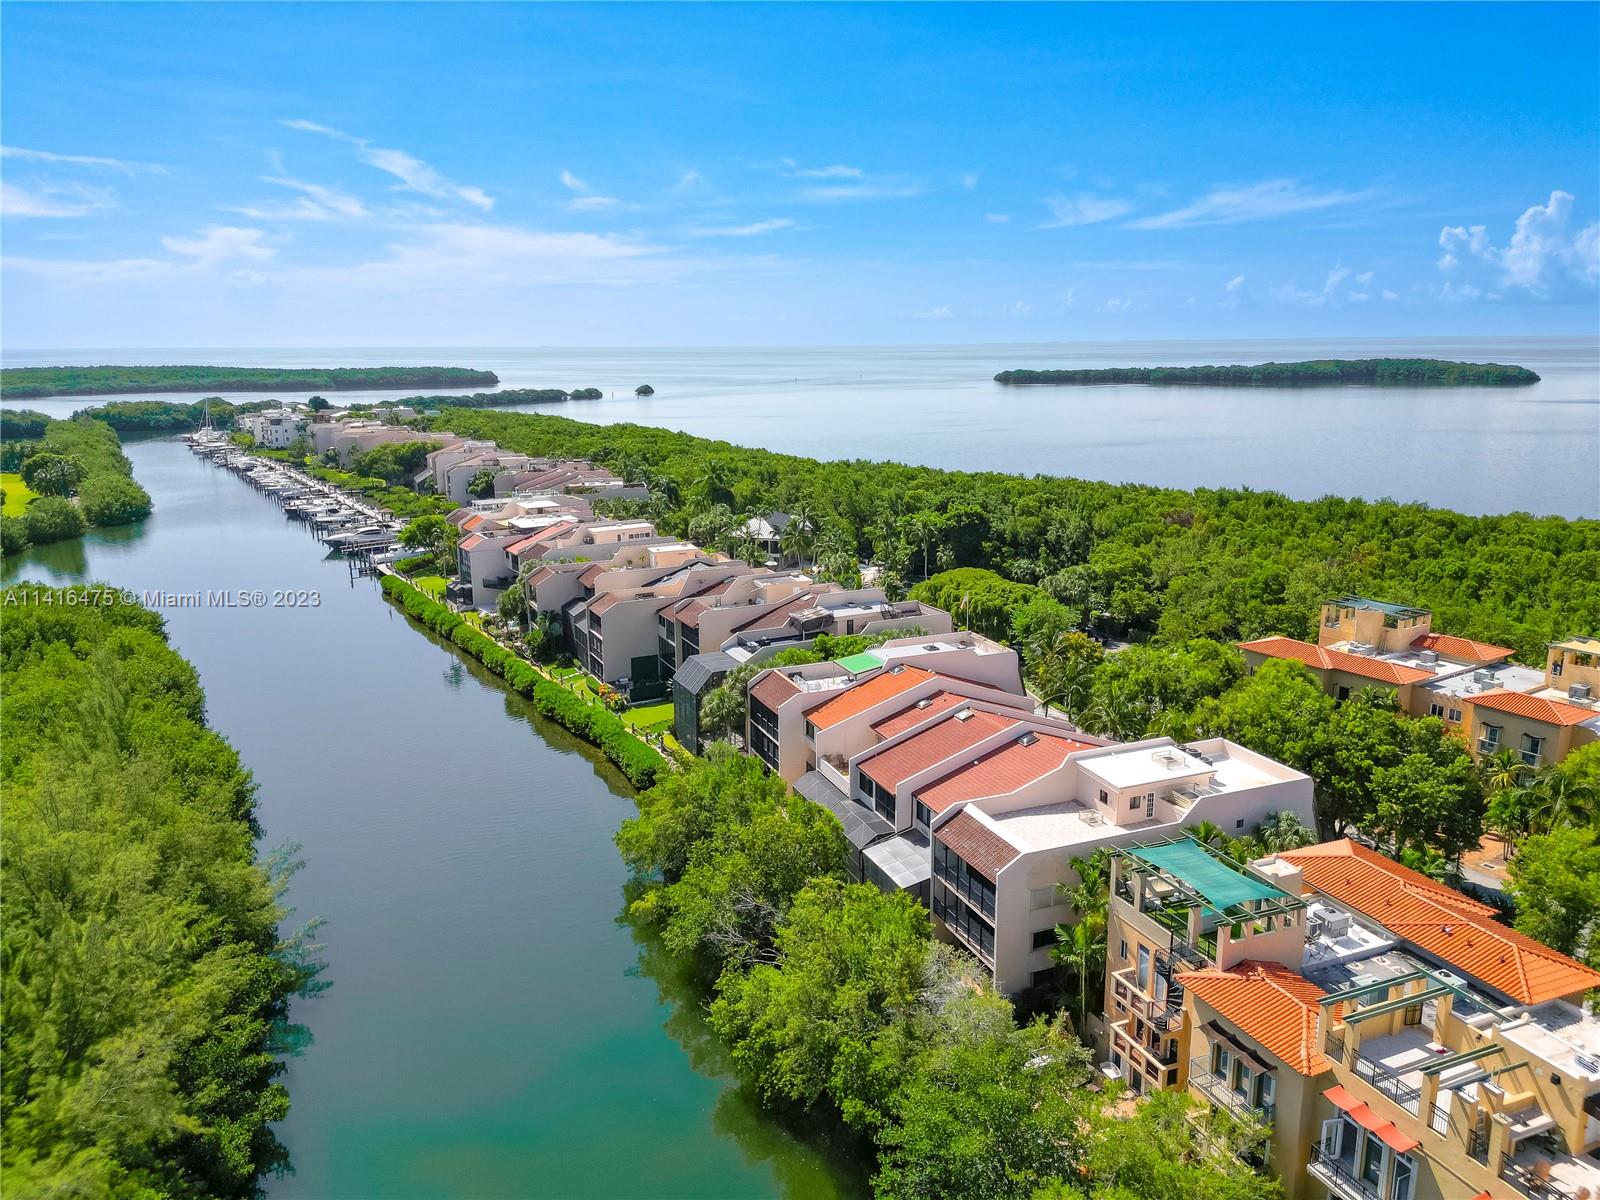 Imagine yourself surrounded by water in a Beautifully Landscaped Island Townhouse. At the Southern Tip of the Gables Waterway Sits a Rarely Available Townhome Which is 1 of the 2 Biggest Townhomes in Royal Harbour w/Almost 6000 Sq Ft of Living Space. Home Features 5 Bed, 4.5 Baths, High Ceilings, Newly Remodeled Kitchen w/SS Appl, Elevator, Rooftop Terrace, 2 Car Garage & Partial Impact Windows & Doors. The Huge Roof Top Terrace is Ideal for Entertaining & the Backyard is Great for Watching the Manatees & Dolphins Swim By. As a Private Community, Royal Harbour Boasts Private Security, 2 Tennis Courts (1 doubles as a Pickle Ball Court), Clubhouse, Heated Pool/Spa, Gym, Beach w/Volleyball Court, a Nature Walk Pier to Bay & Marina w/No Bridges to Bay. This is Resort Style Living at its Best.